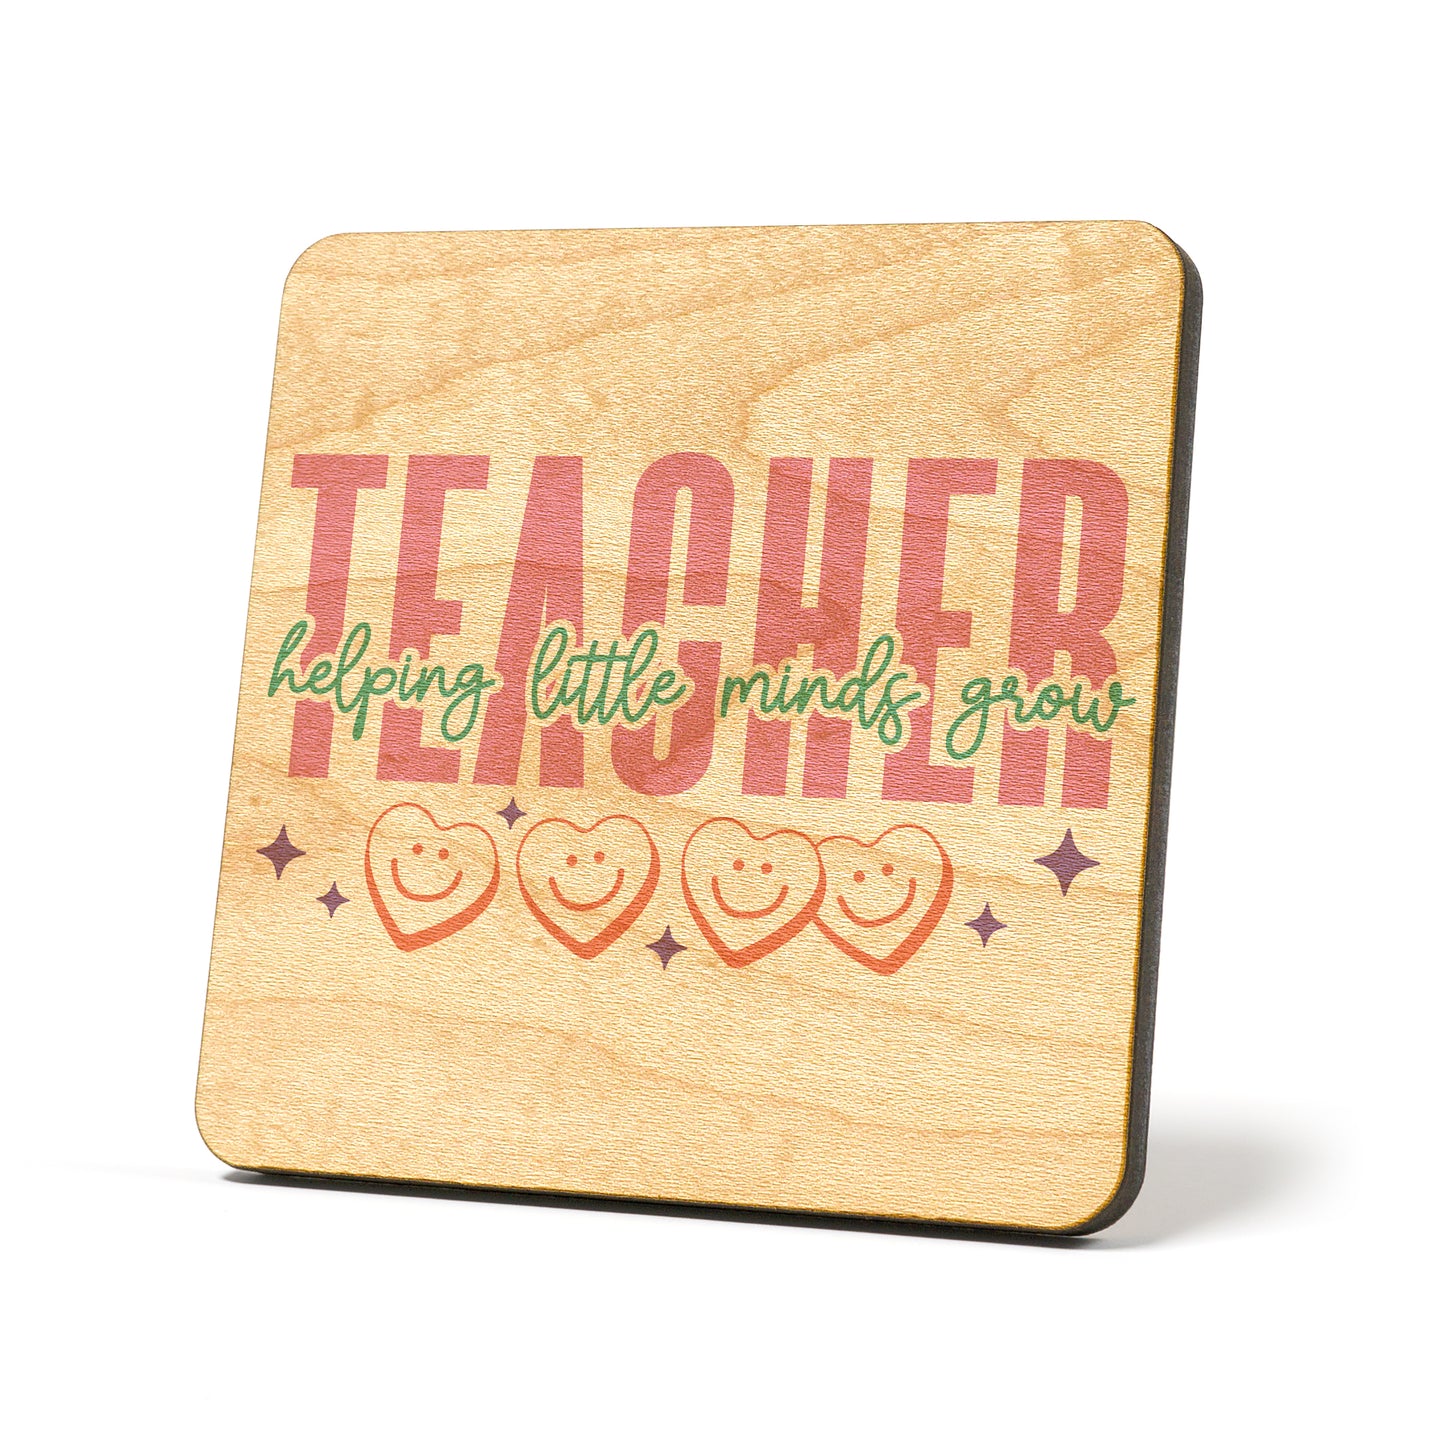 Teacher helping little minds Graphic Coasters